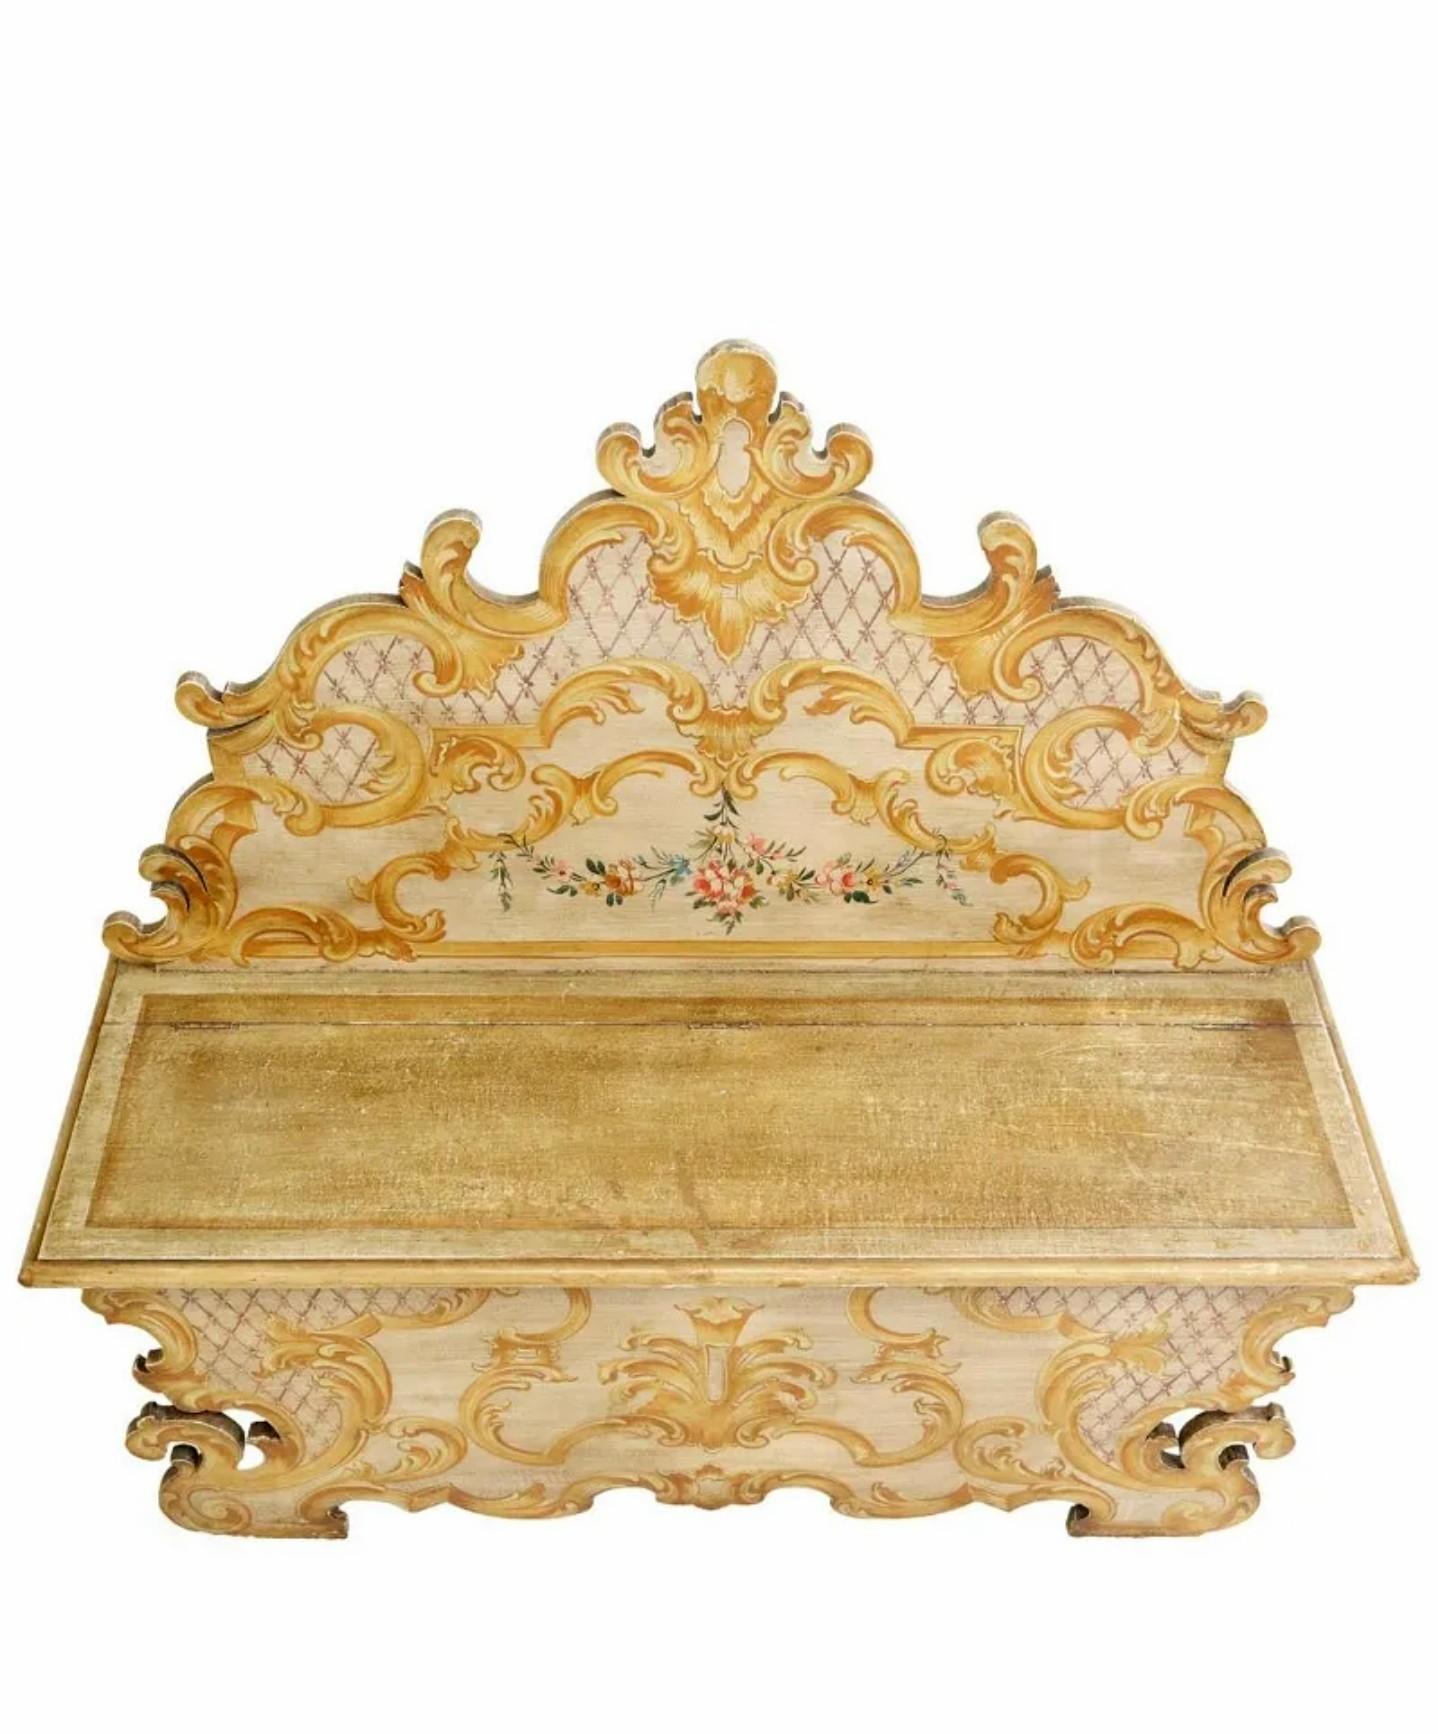 A stunning antique Italian Baroque style hand-painted wooden hall bench.

Born in Italy in the early 20th century, hand-crafted solid wood construction, richly decorated sculptural silhouette, having a shaped back with scroll crest, hinged bench